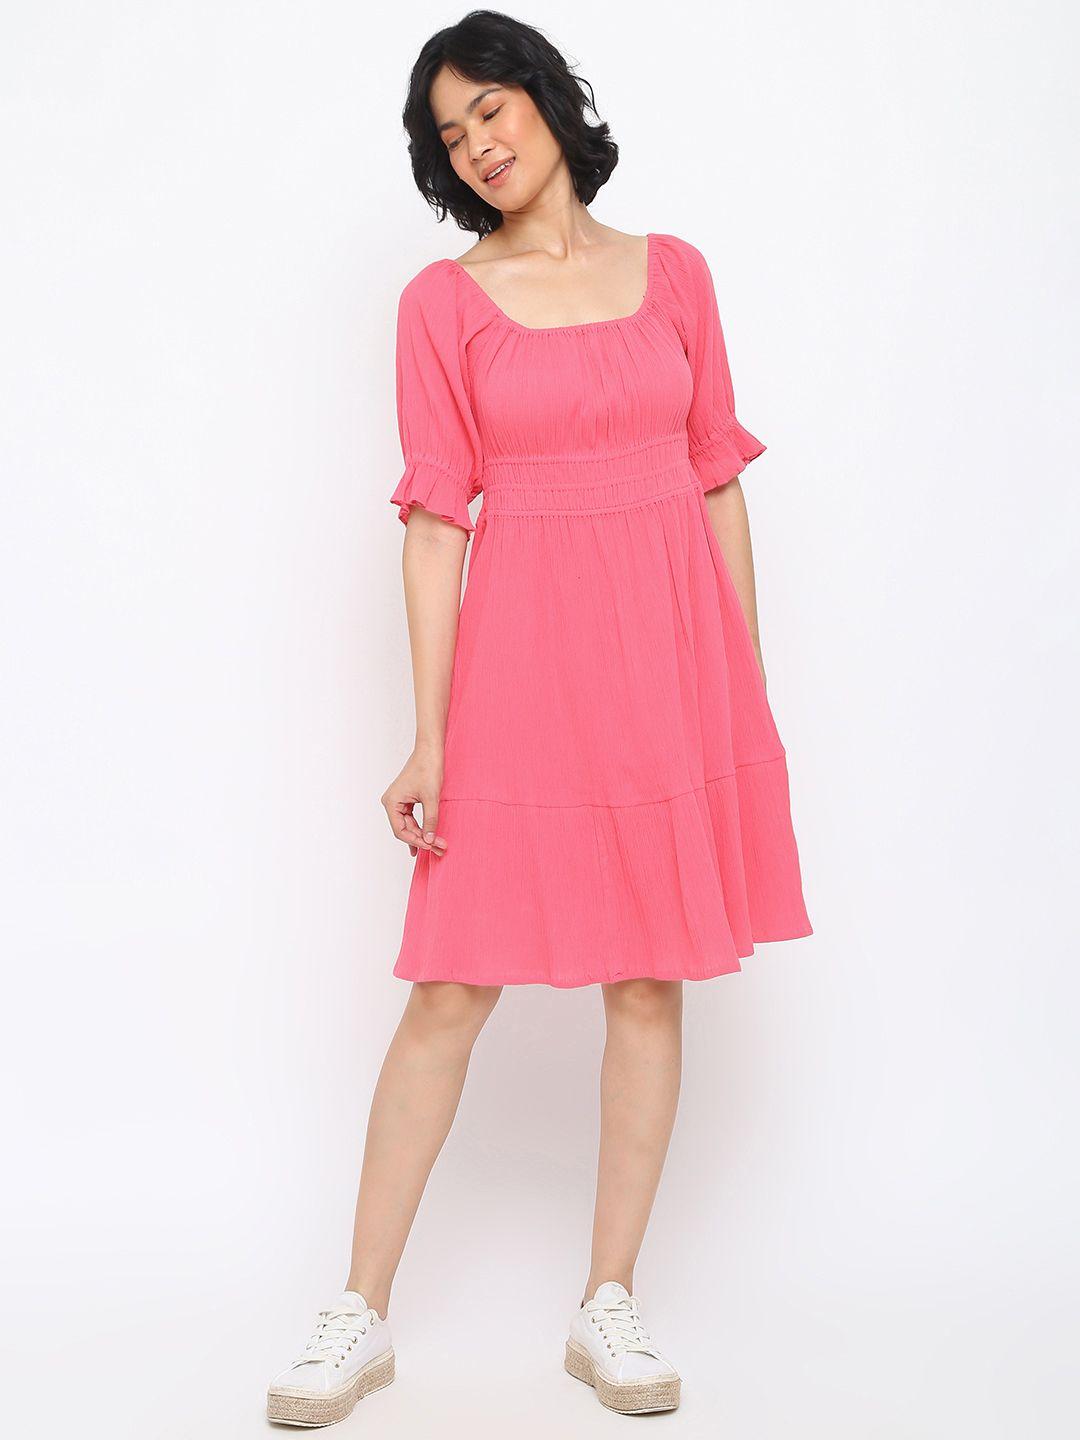 fabindia pink crinkled square neck empire dress with belt